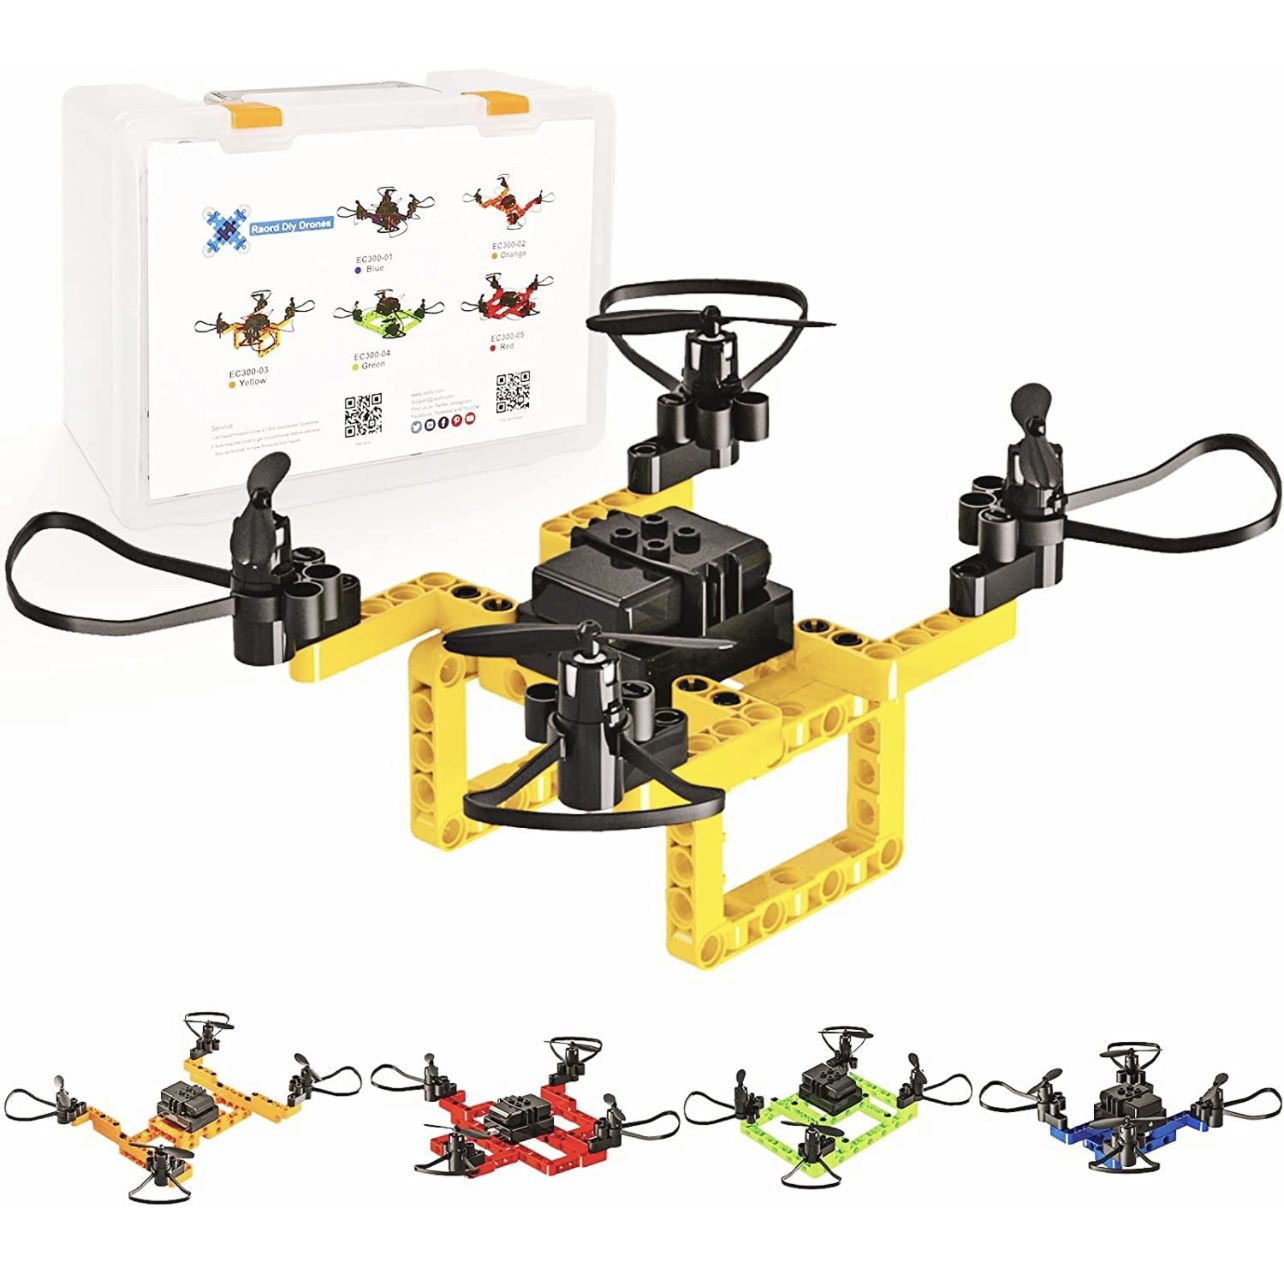 Mini Drone with Creative DIY Building Blocks Sets for Kids Beginners and Adults, 5-in-1 toy for Educational STEM Science Experiment, Family Activity, 